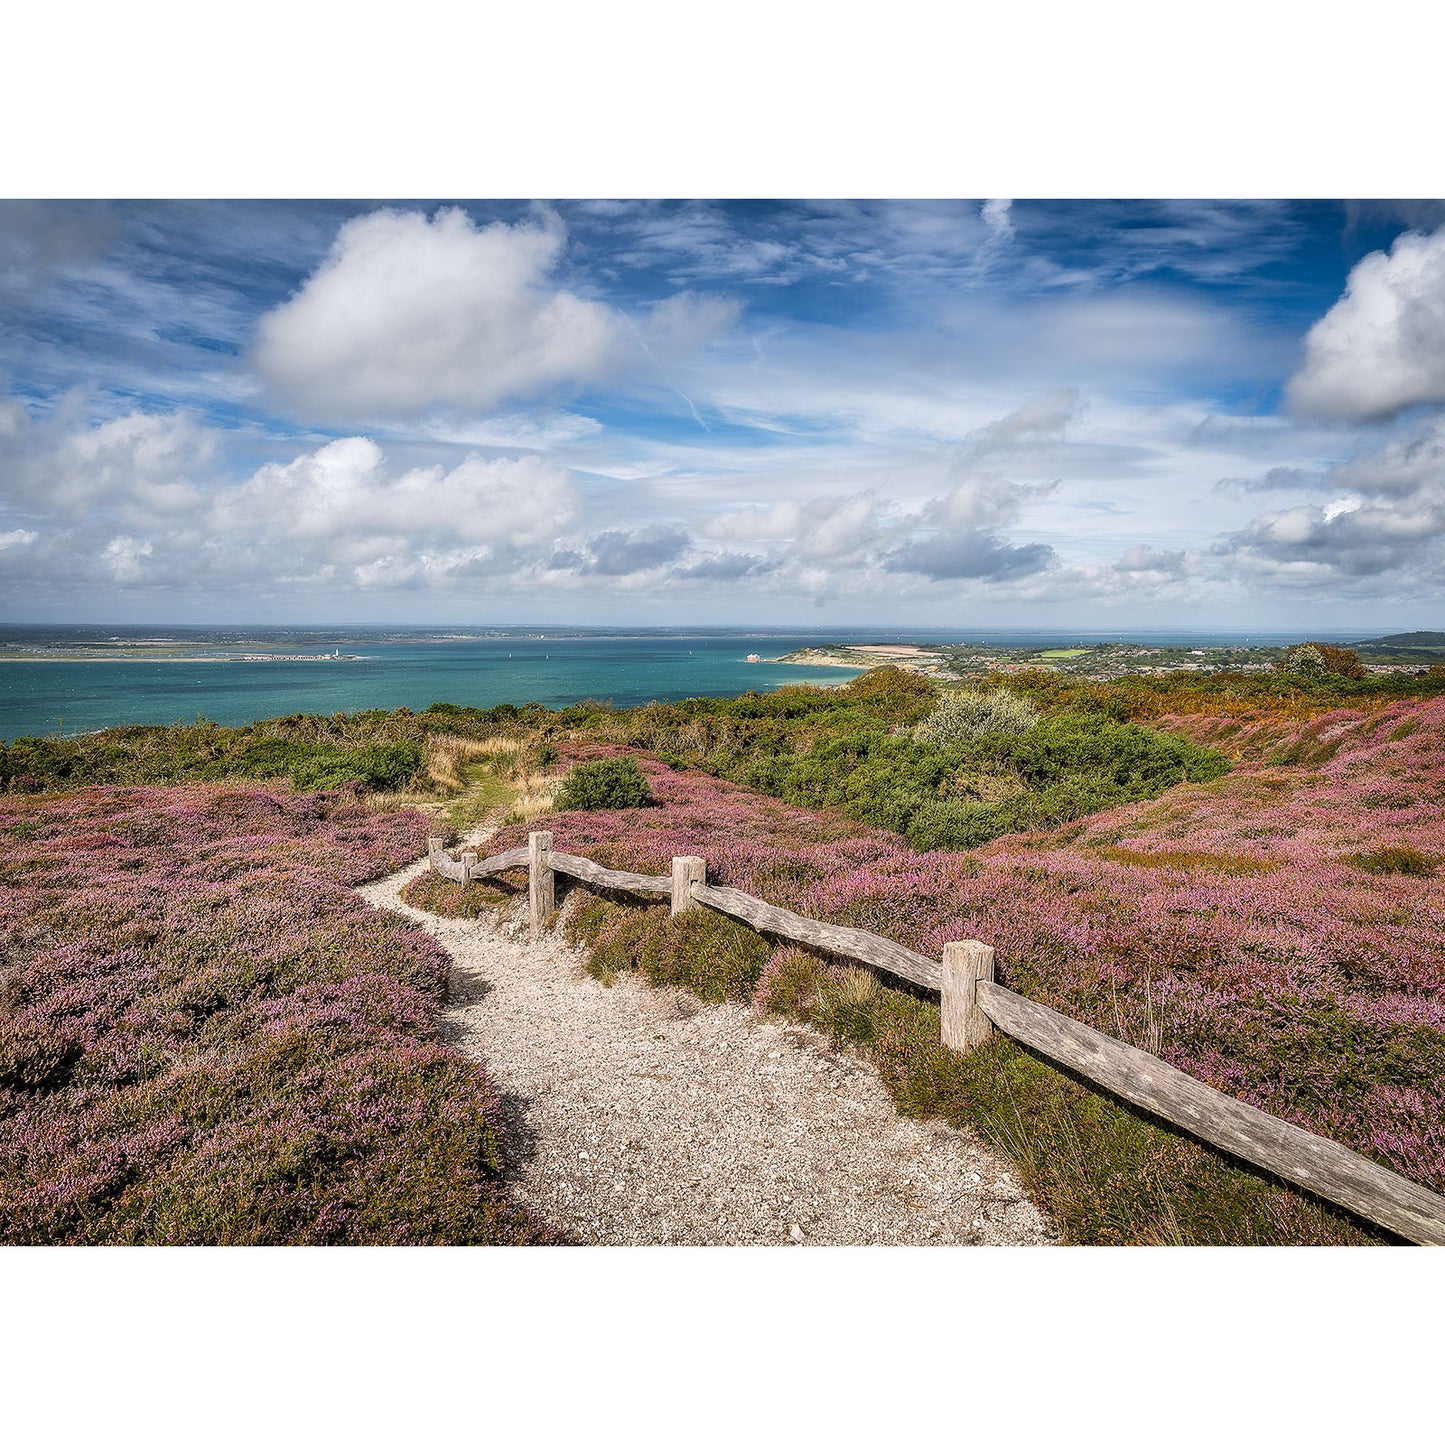 A coastal walkway meandering through a landscape of flowering heather under a blue sky with scattered clouds on the Isle of Wight, like Available Light Photography's Toward Totland from Headon Warren.